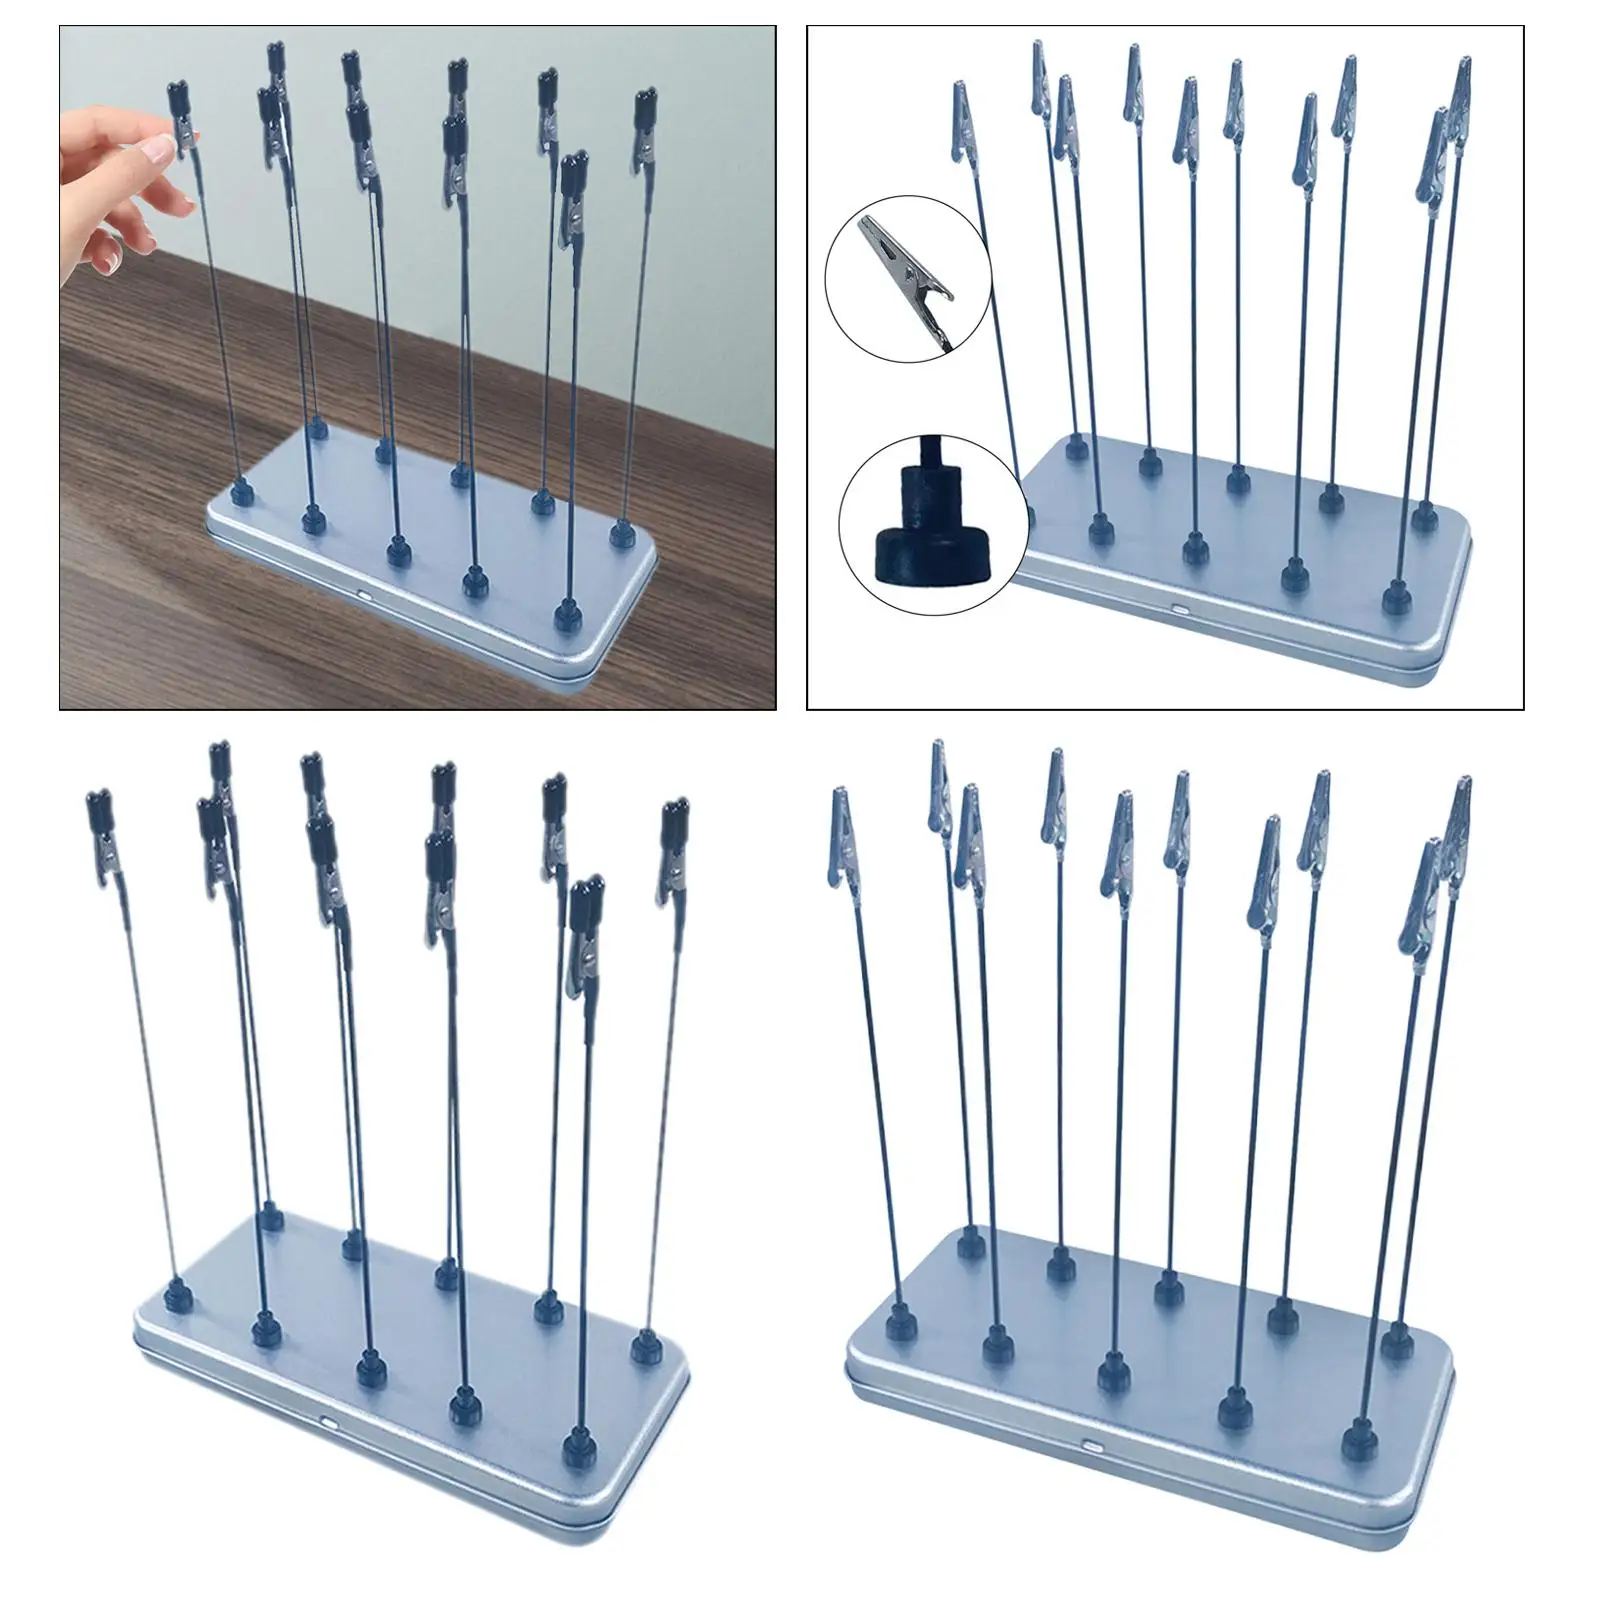 Painting Stand Base Holder Modeling Tools for Airbrush Spray for Modeling Memo DIY Painting Spray Paint Airbrush Hobby Craft